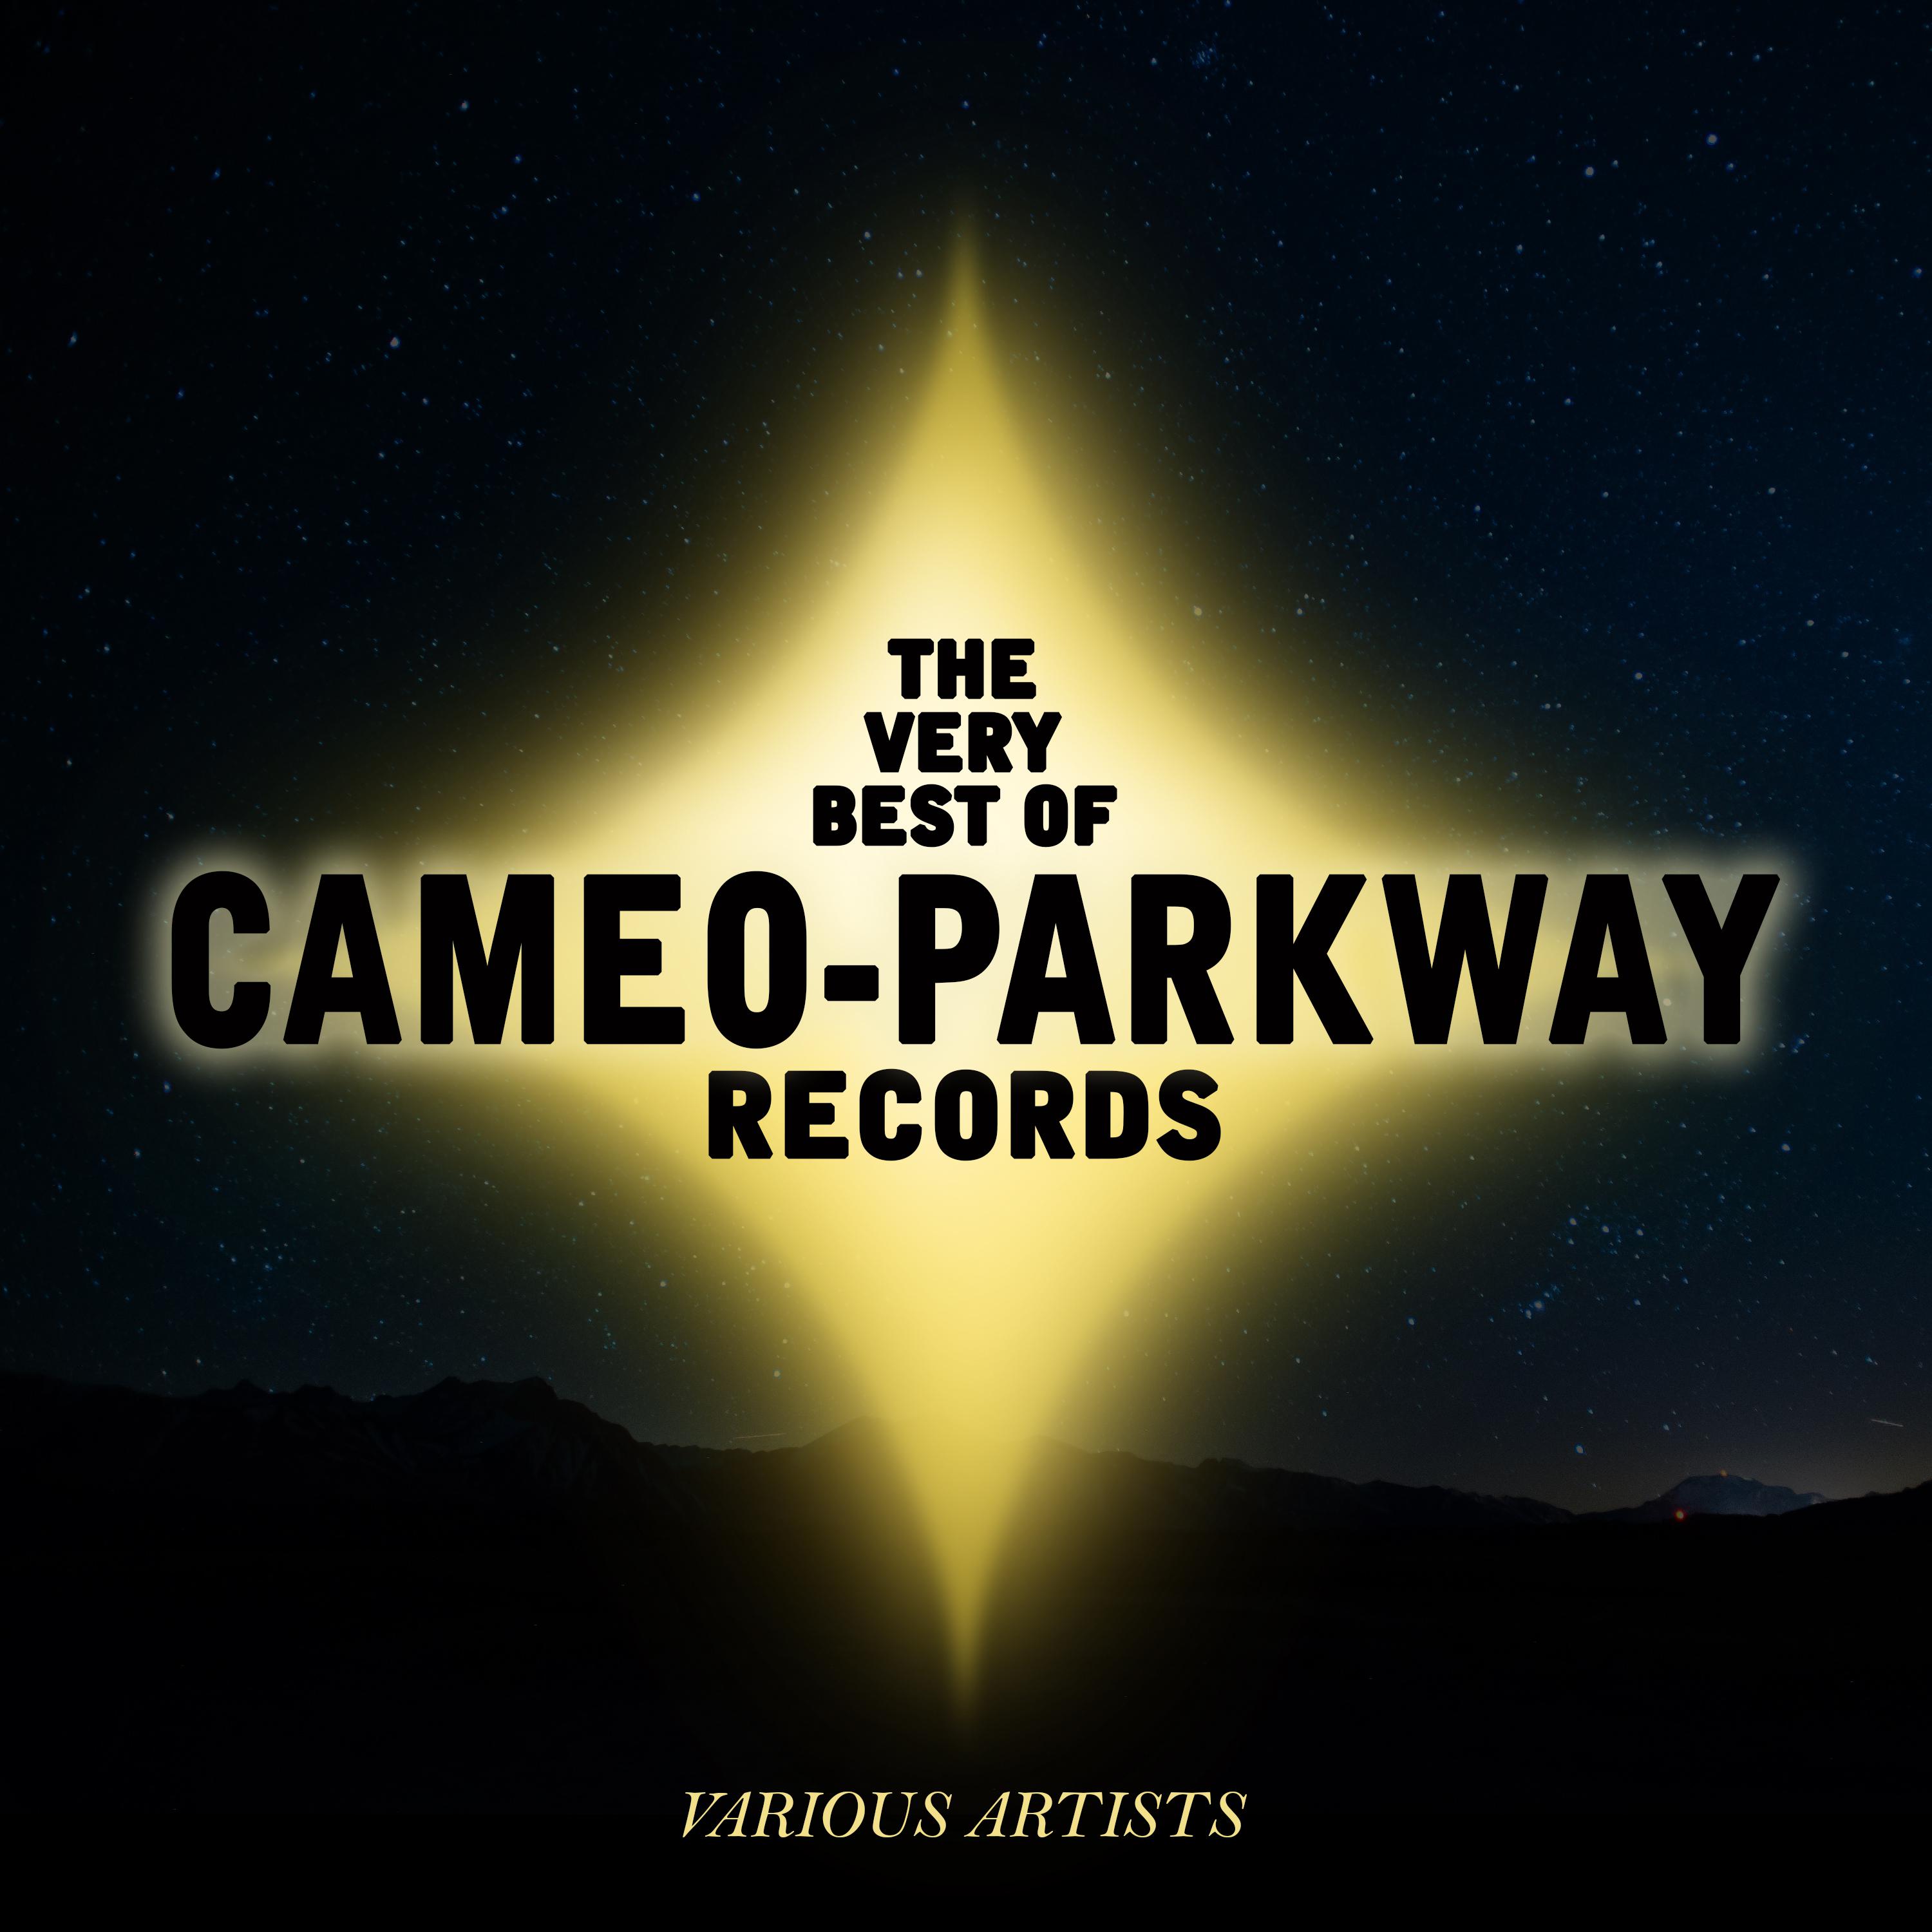 The Very Best of Cameo-Parkway Records